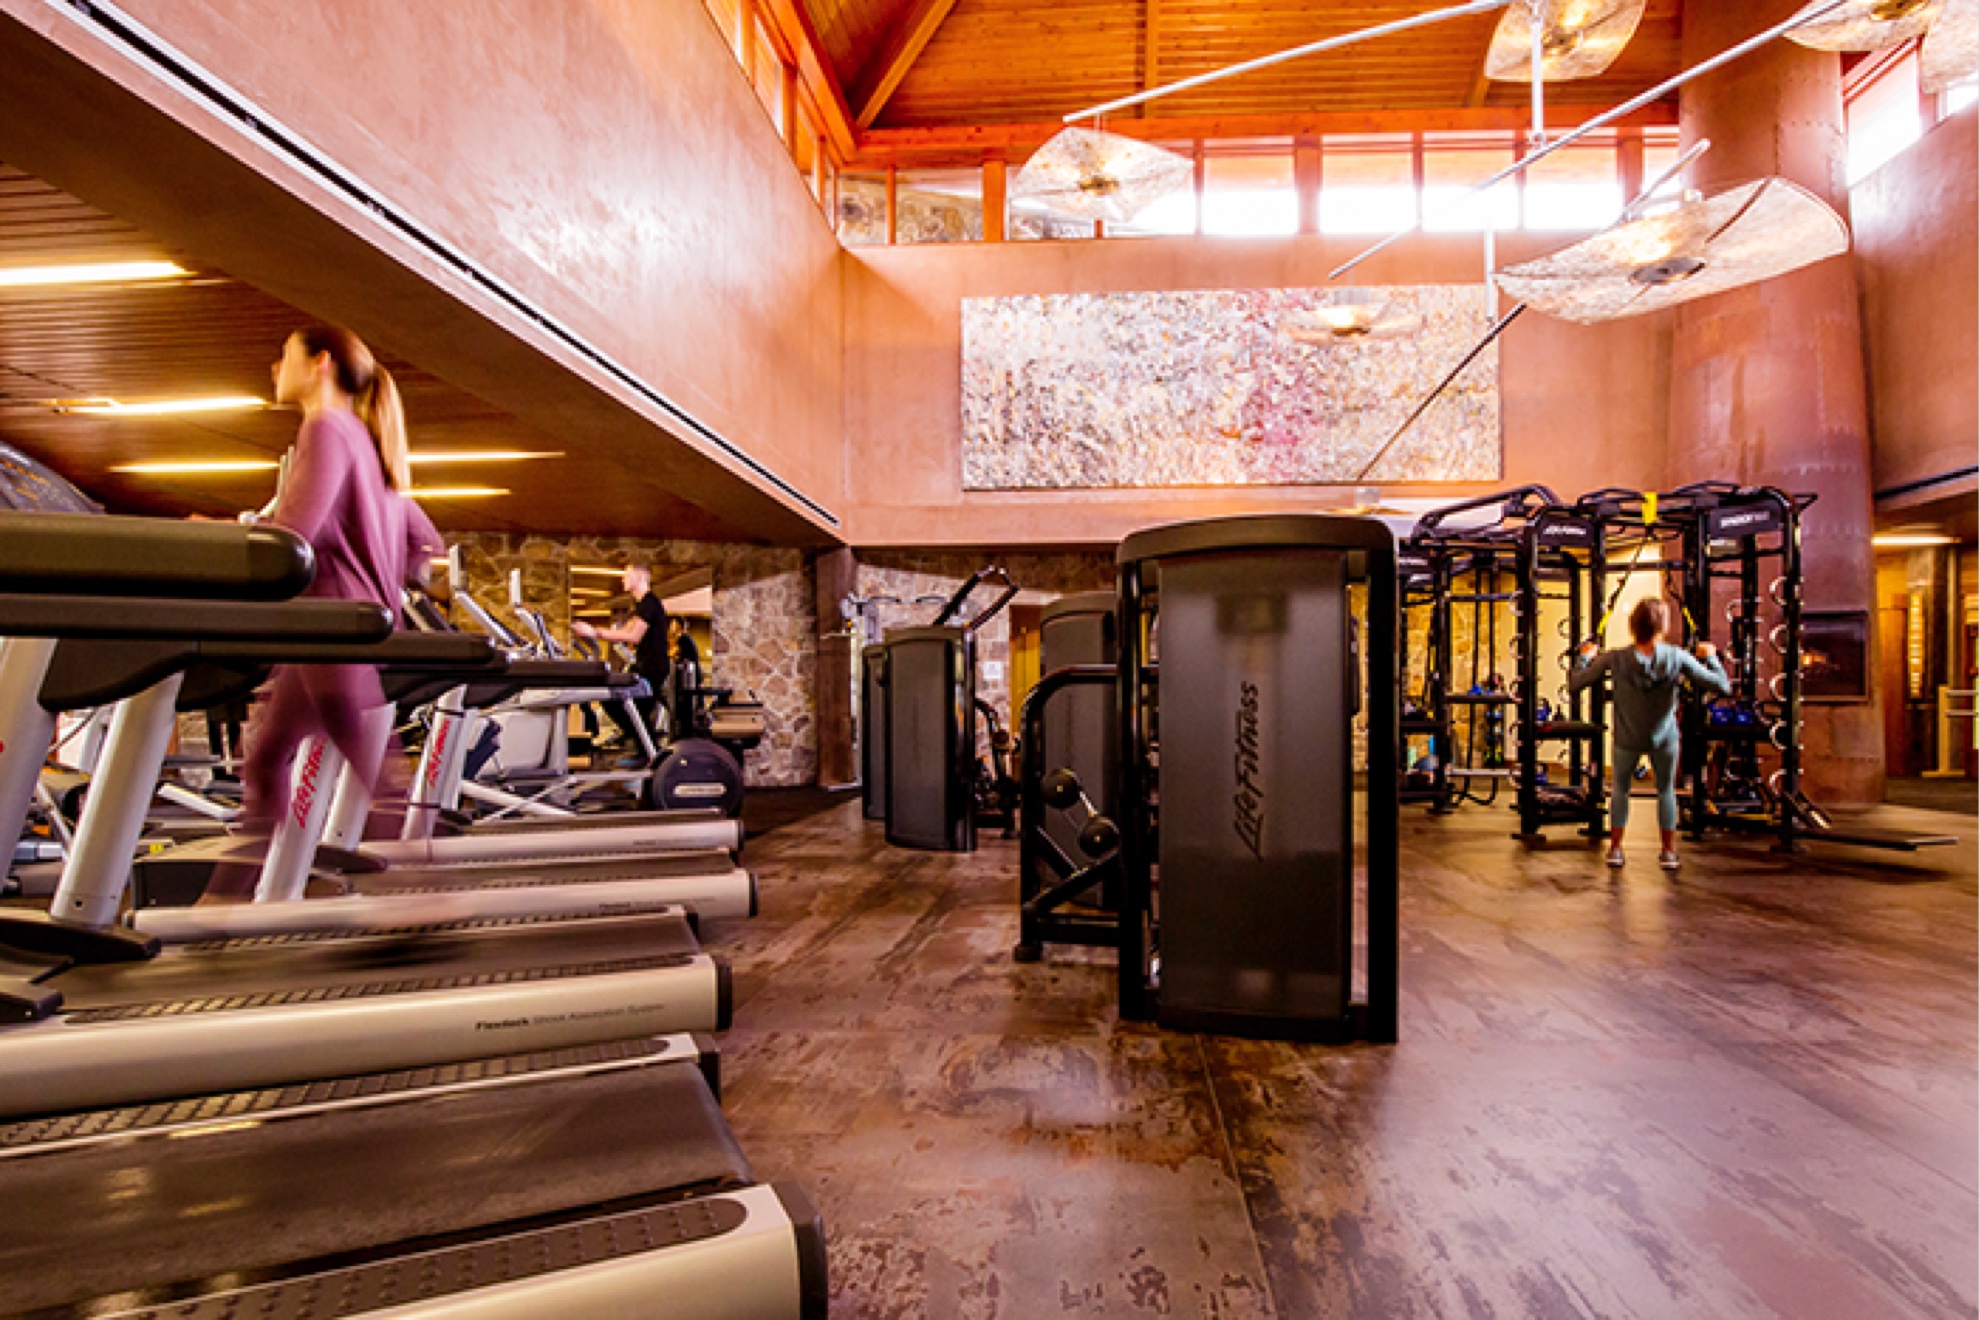 an action shot of a fitness center. There are treadmills lining the left side of the gym. There is a woman walking on one of the treadmills. There are weight machines on the right side of the room with a man using them